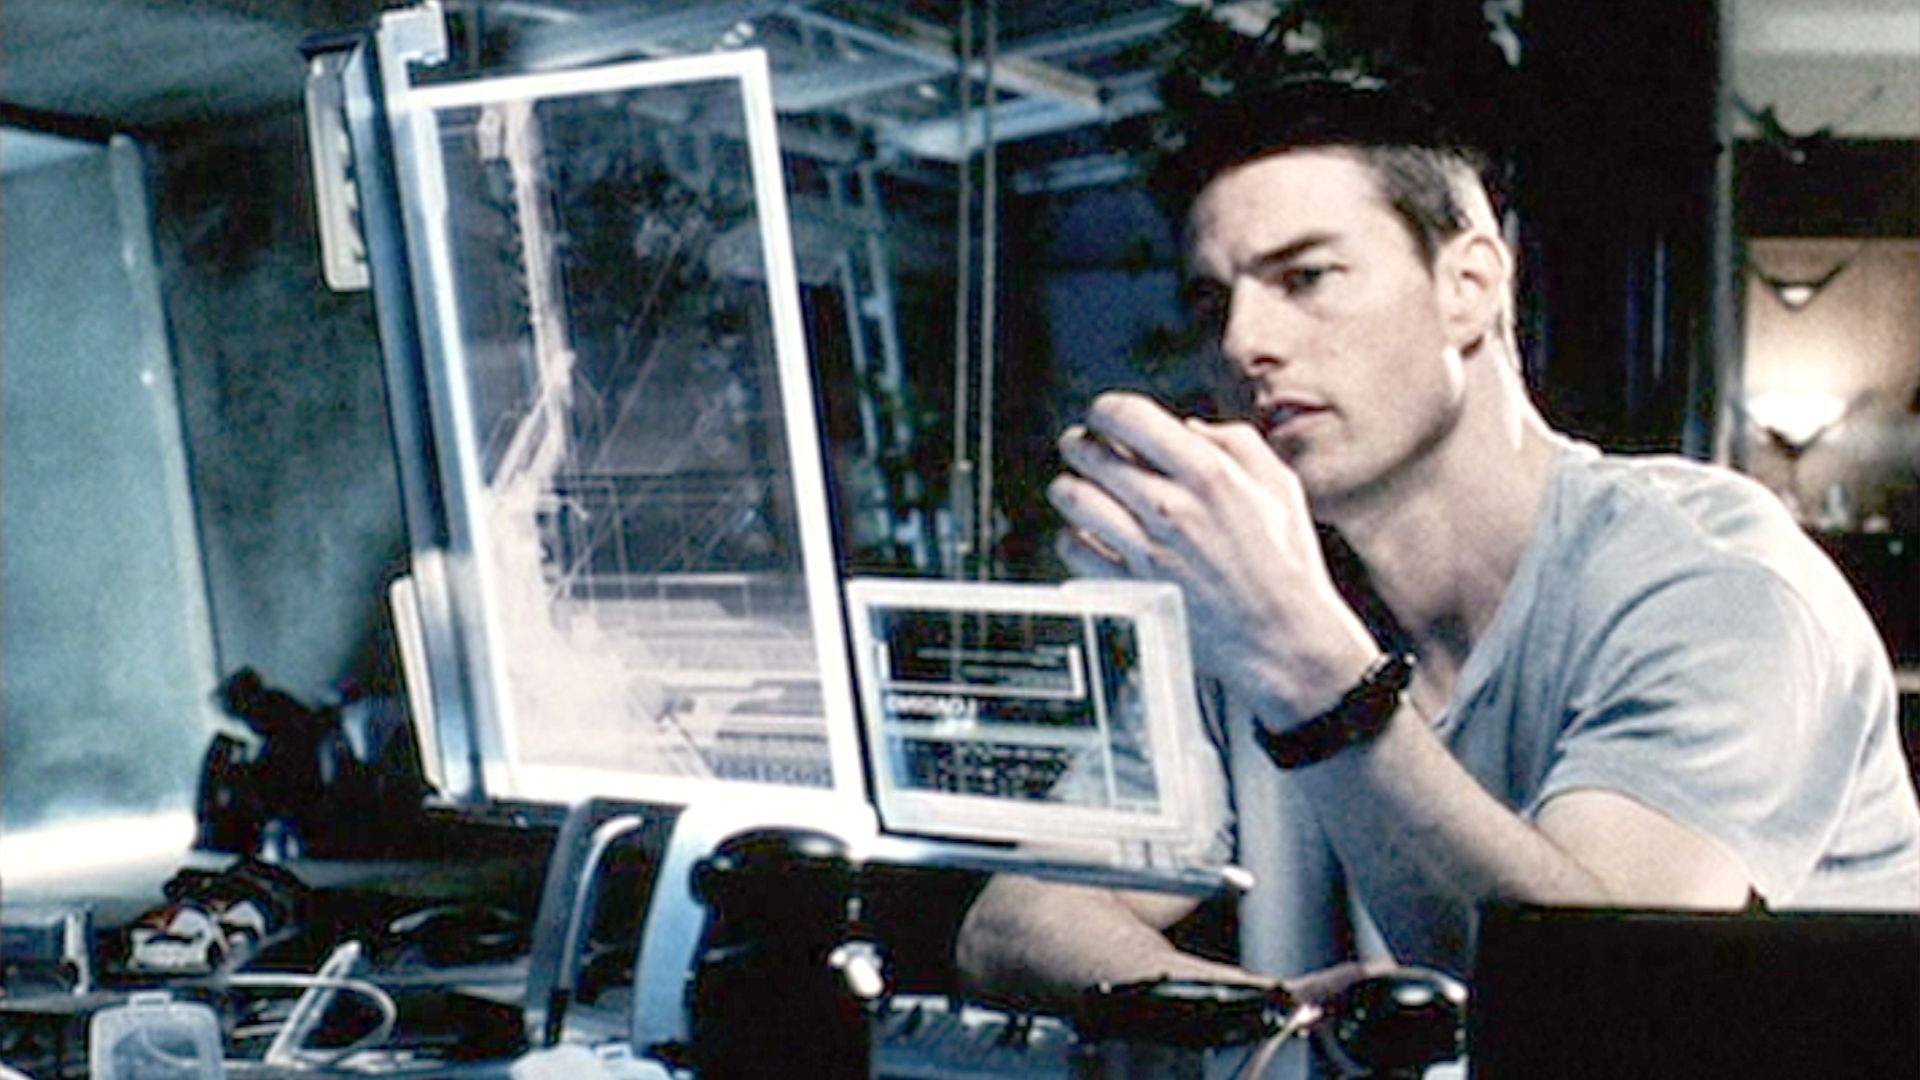 A screenshot from the movie Minority Report.